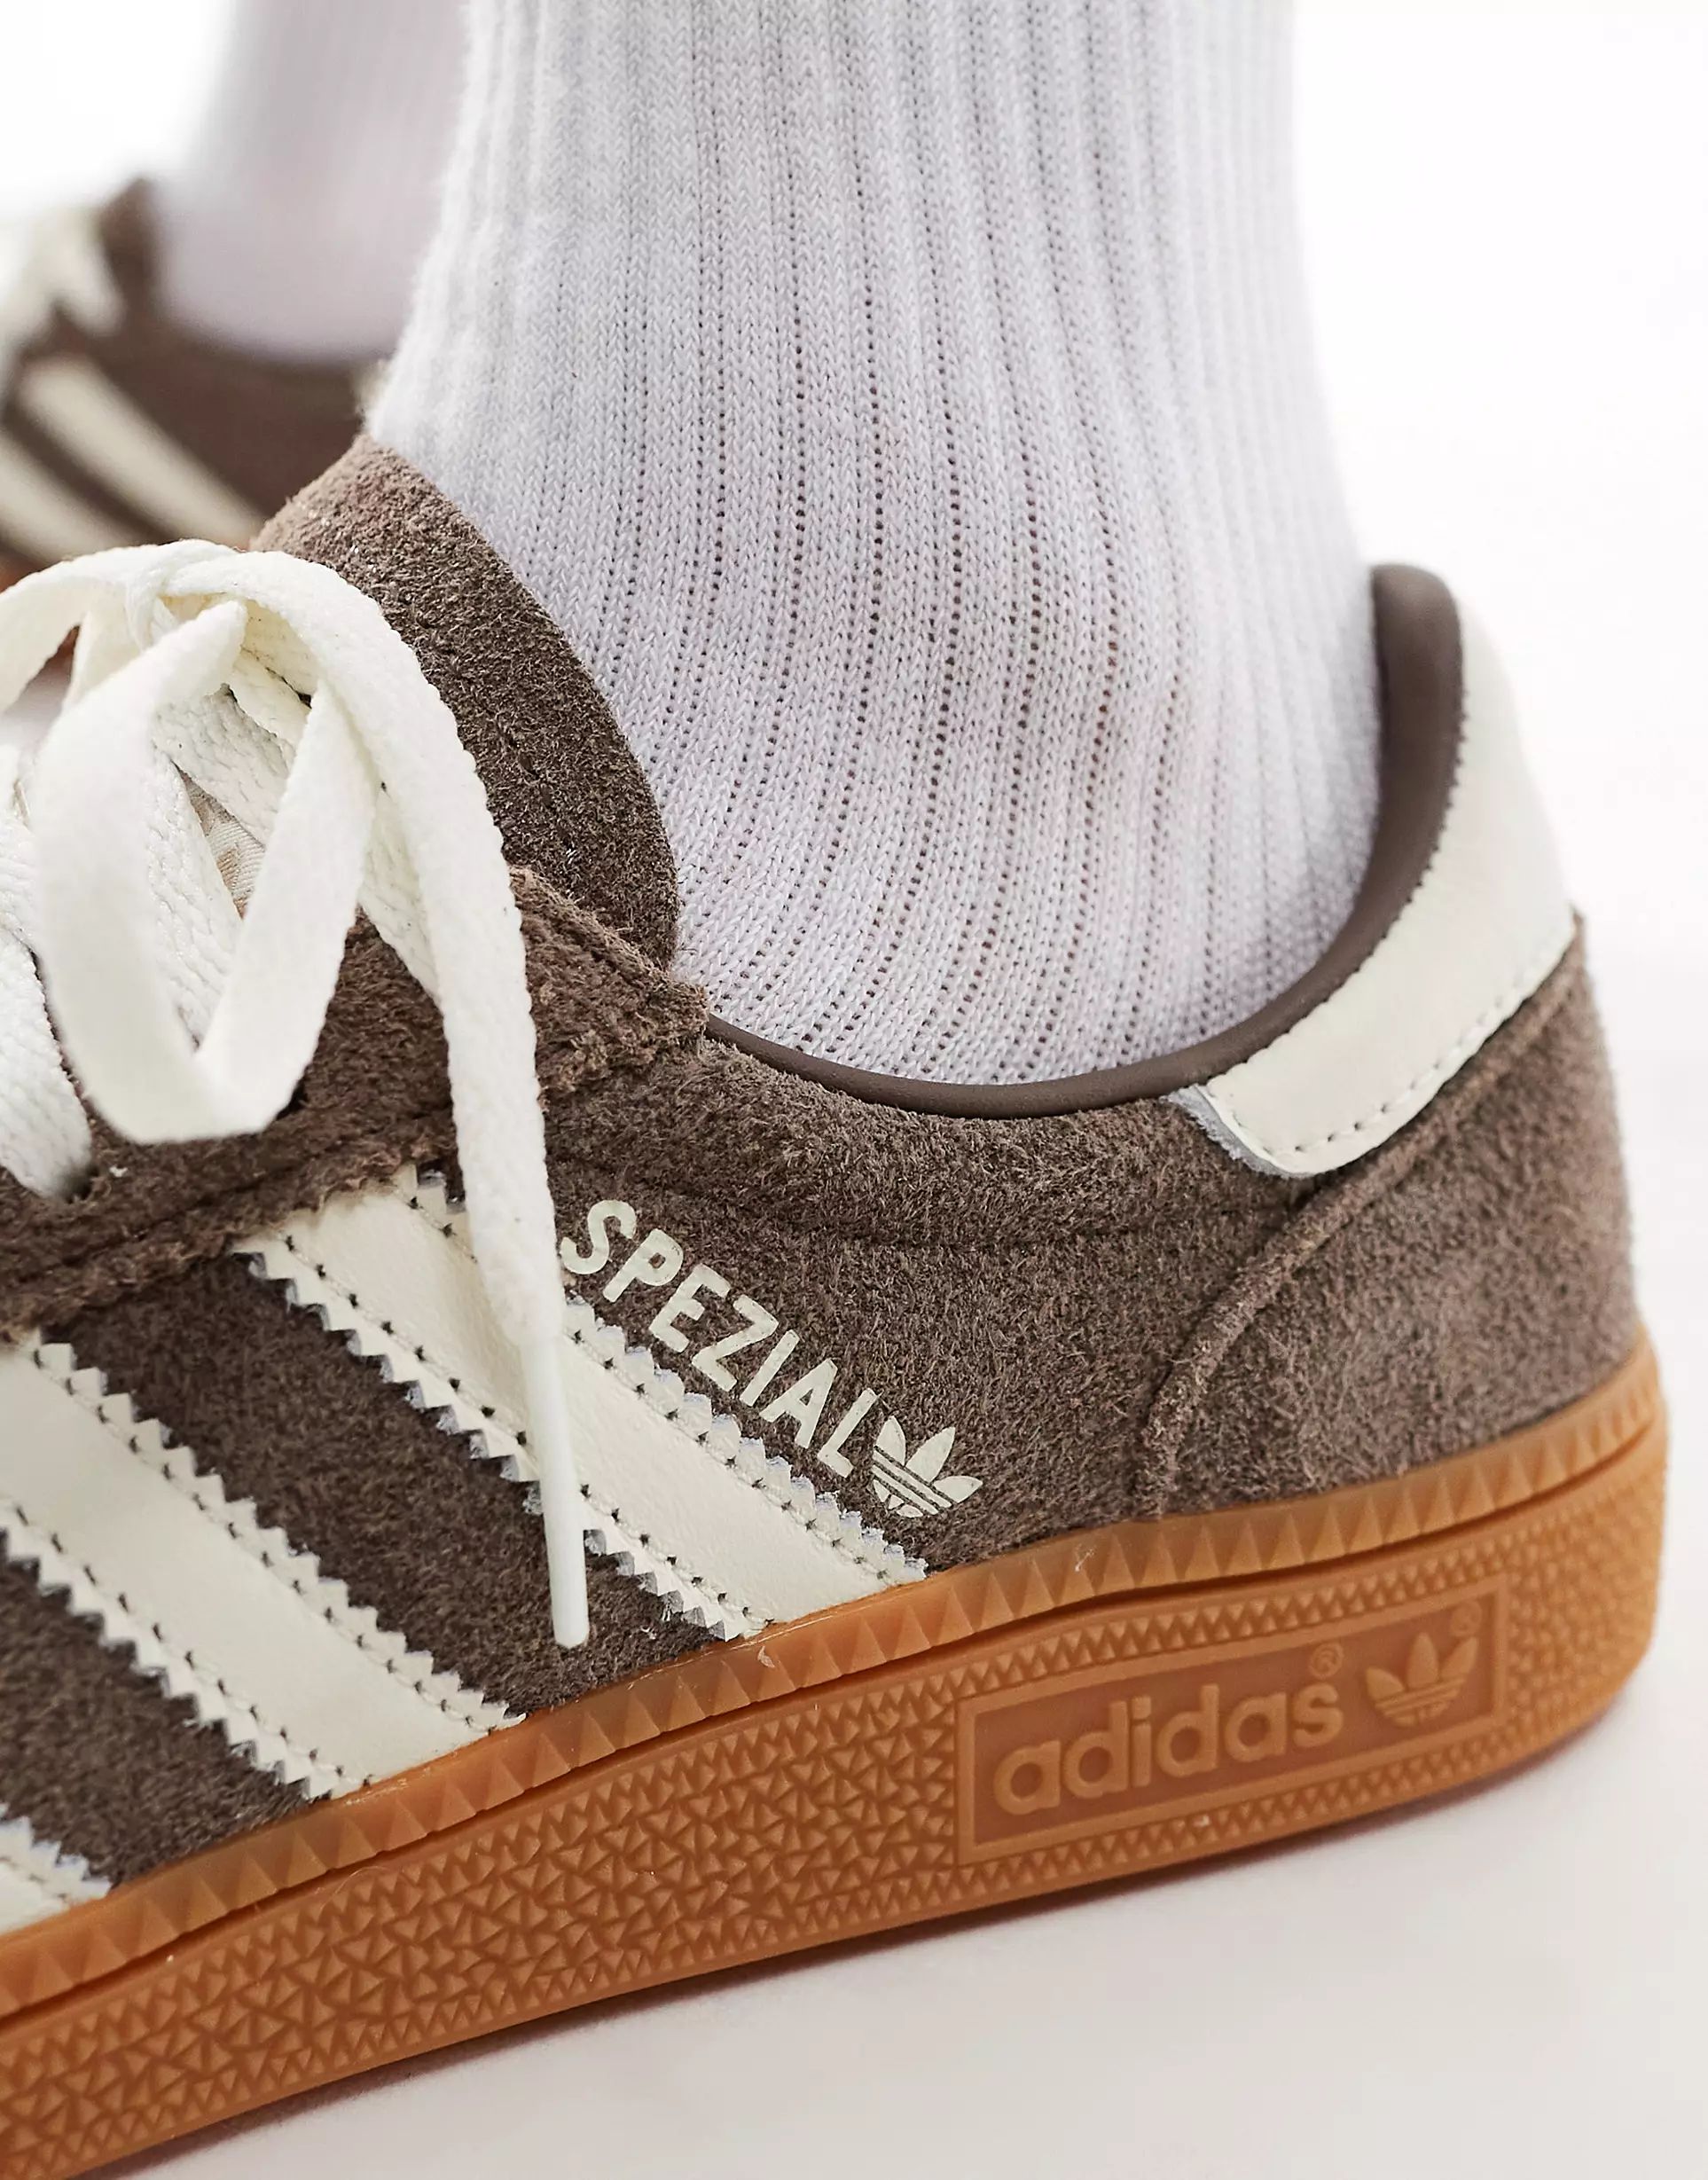 adidas Originals Handball Spezial gum sole trainers in brown and white | ASOS (Global)